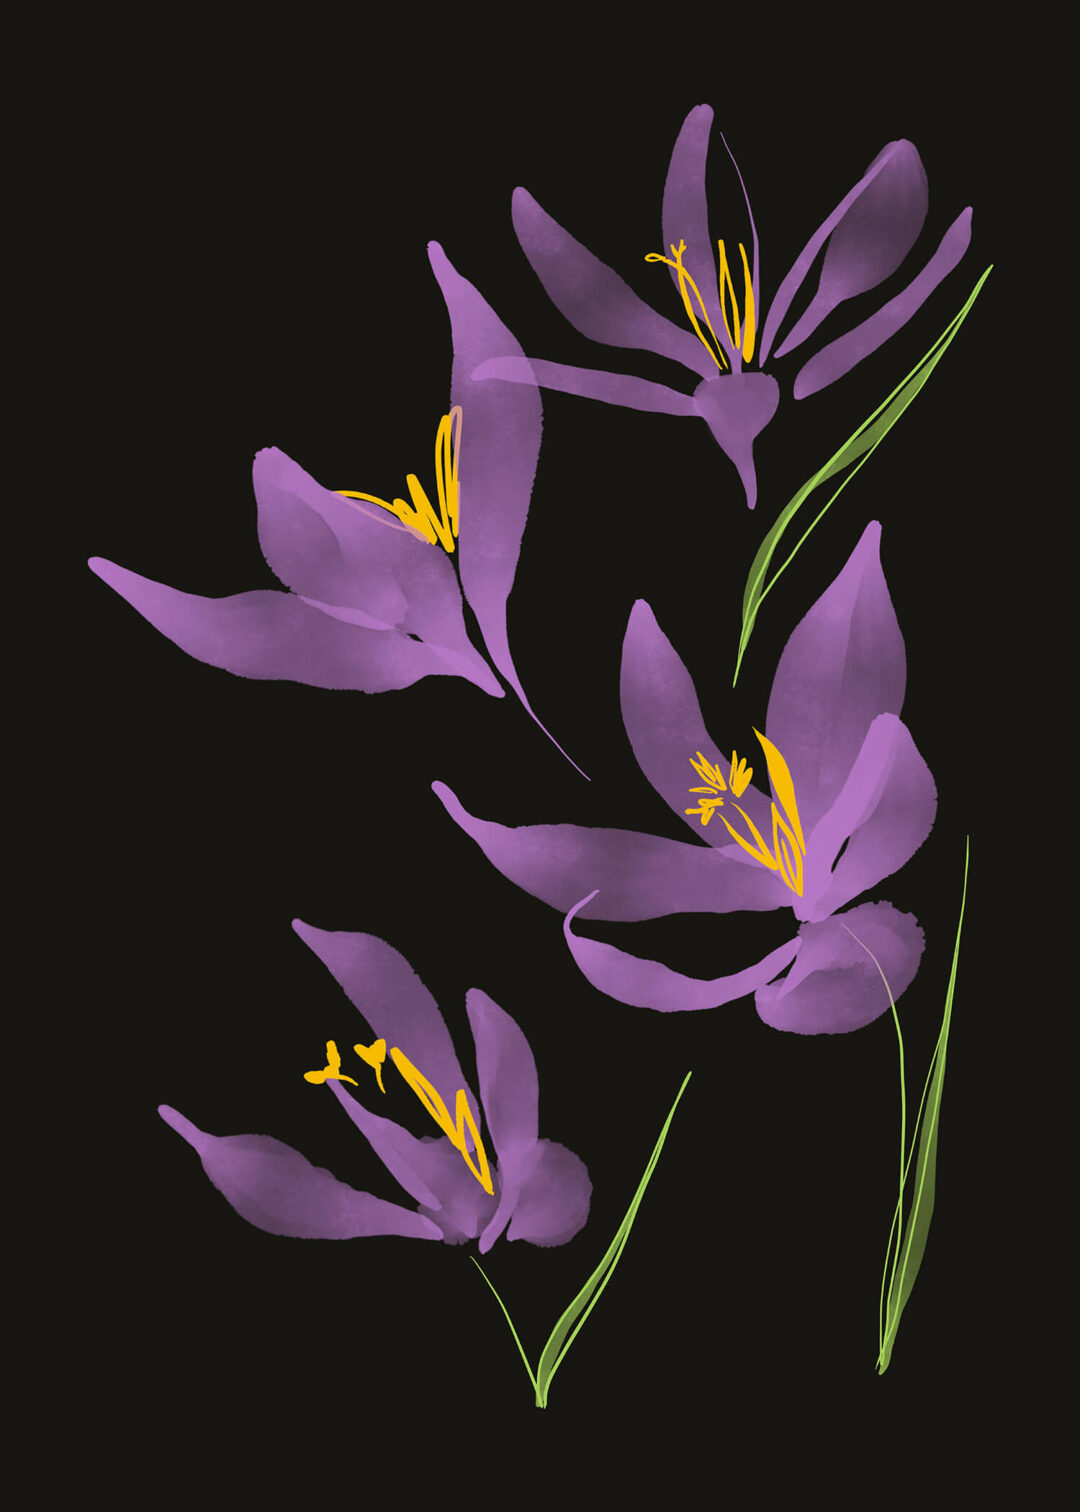 Crocus - FLORA editions Art Prints & Cards for Flower Lovers by Catherine Toews - Giclée fine art print on archival paper